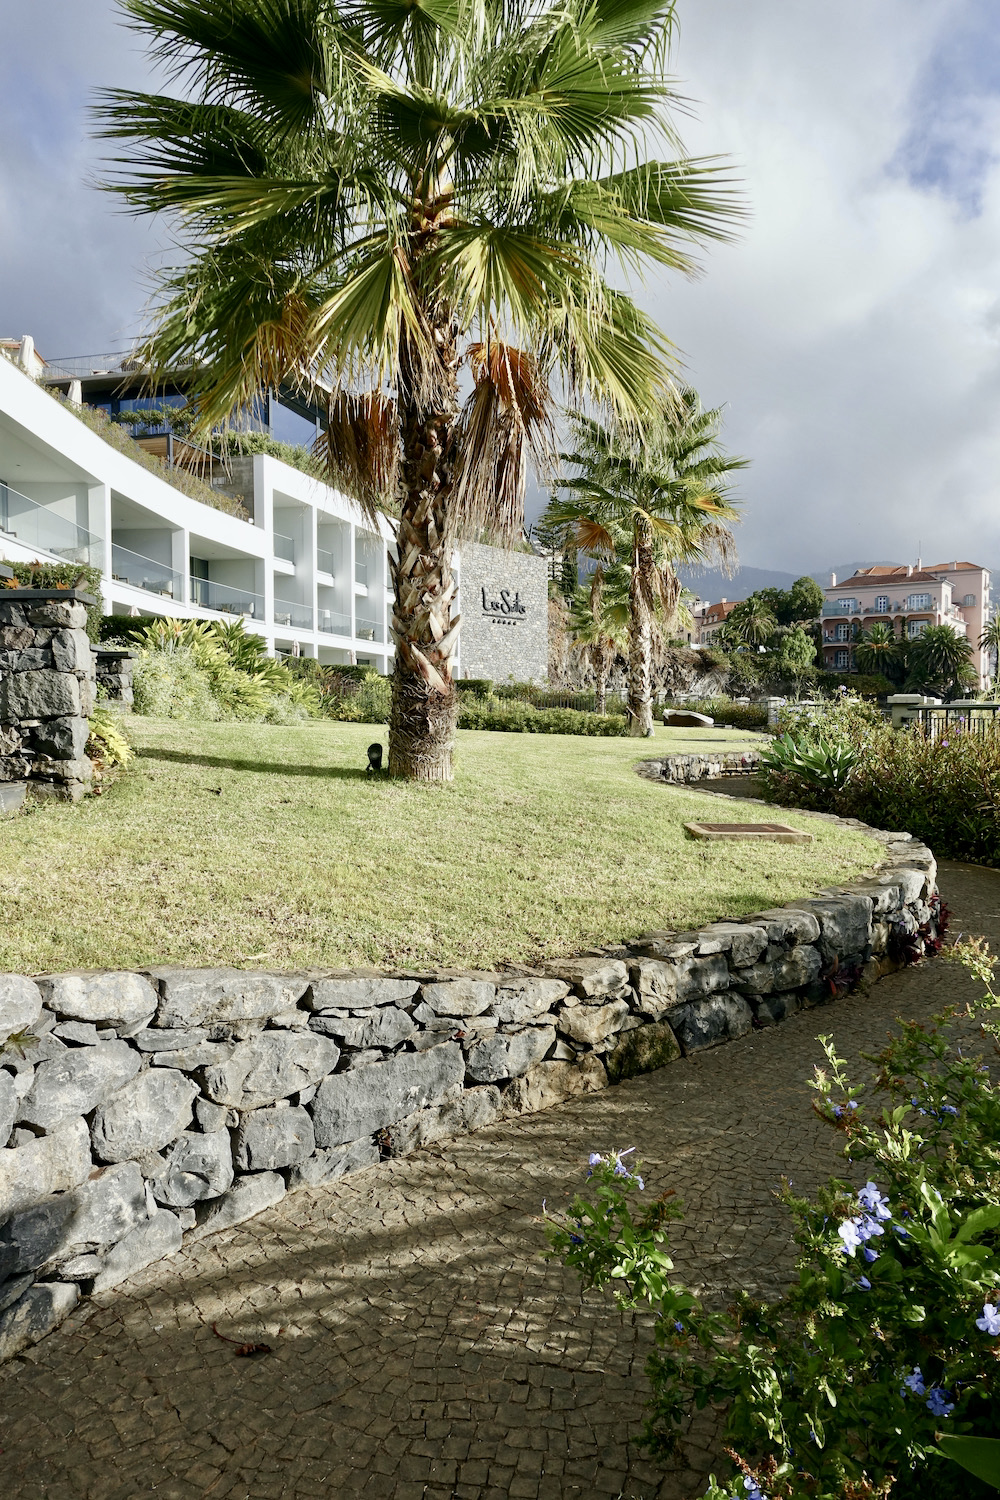 Les Suites at The Cliff Bay & Reid's Palace, 2 of the best luxury hotels in Madeira